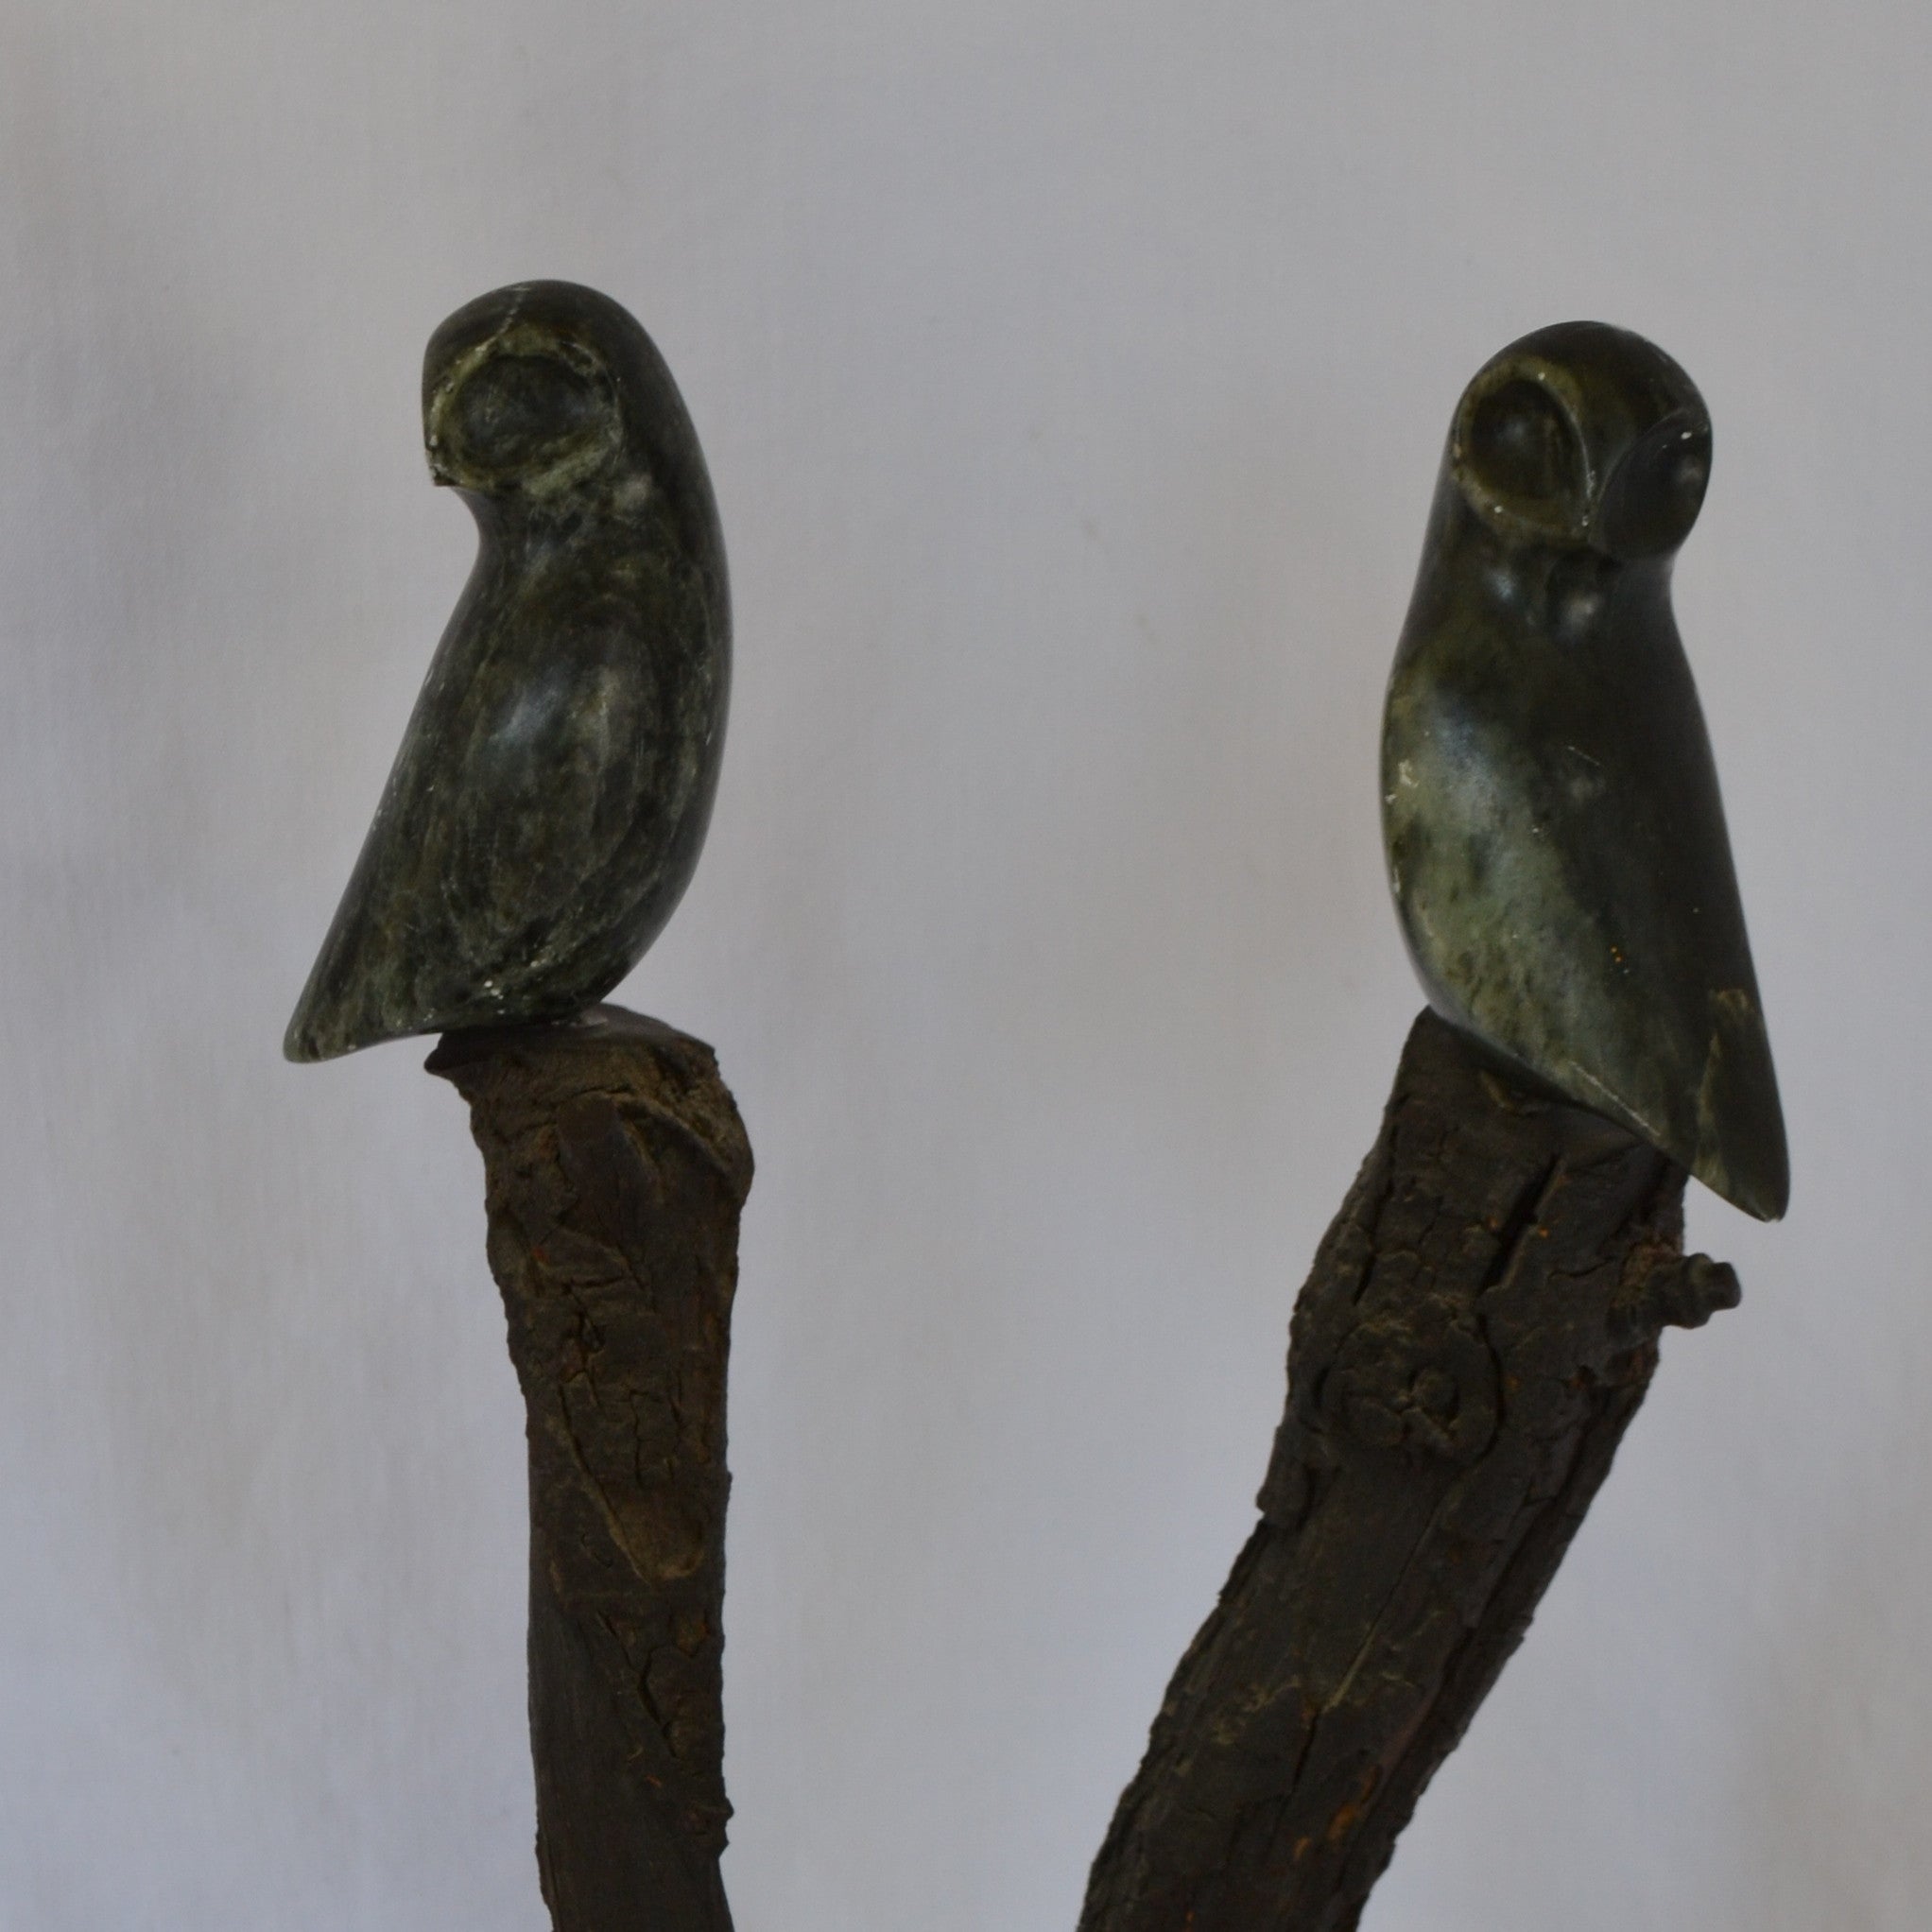 Two birds on a branch Inuit carving - close up